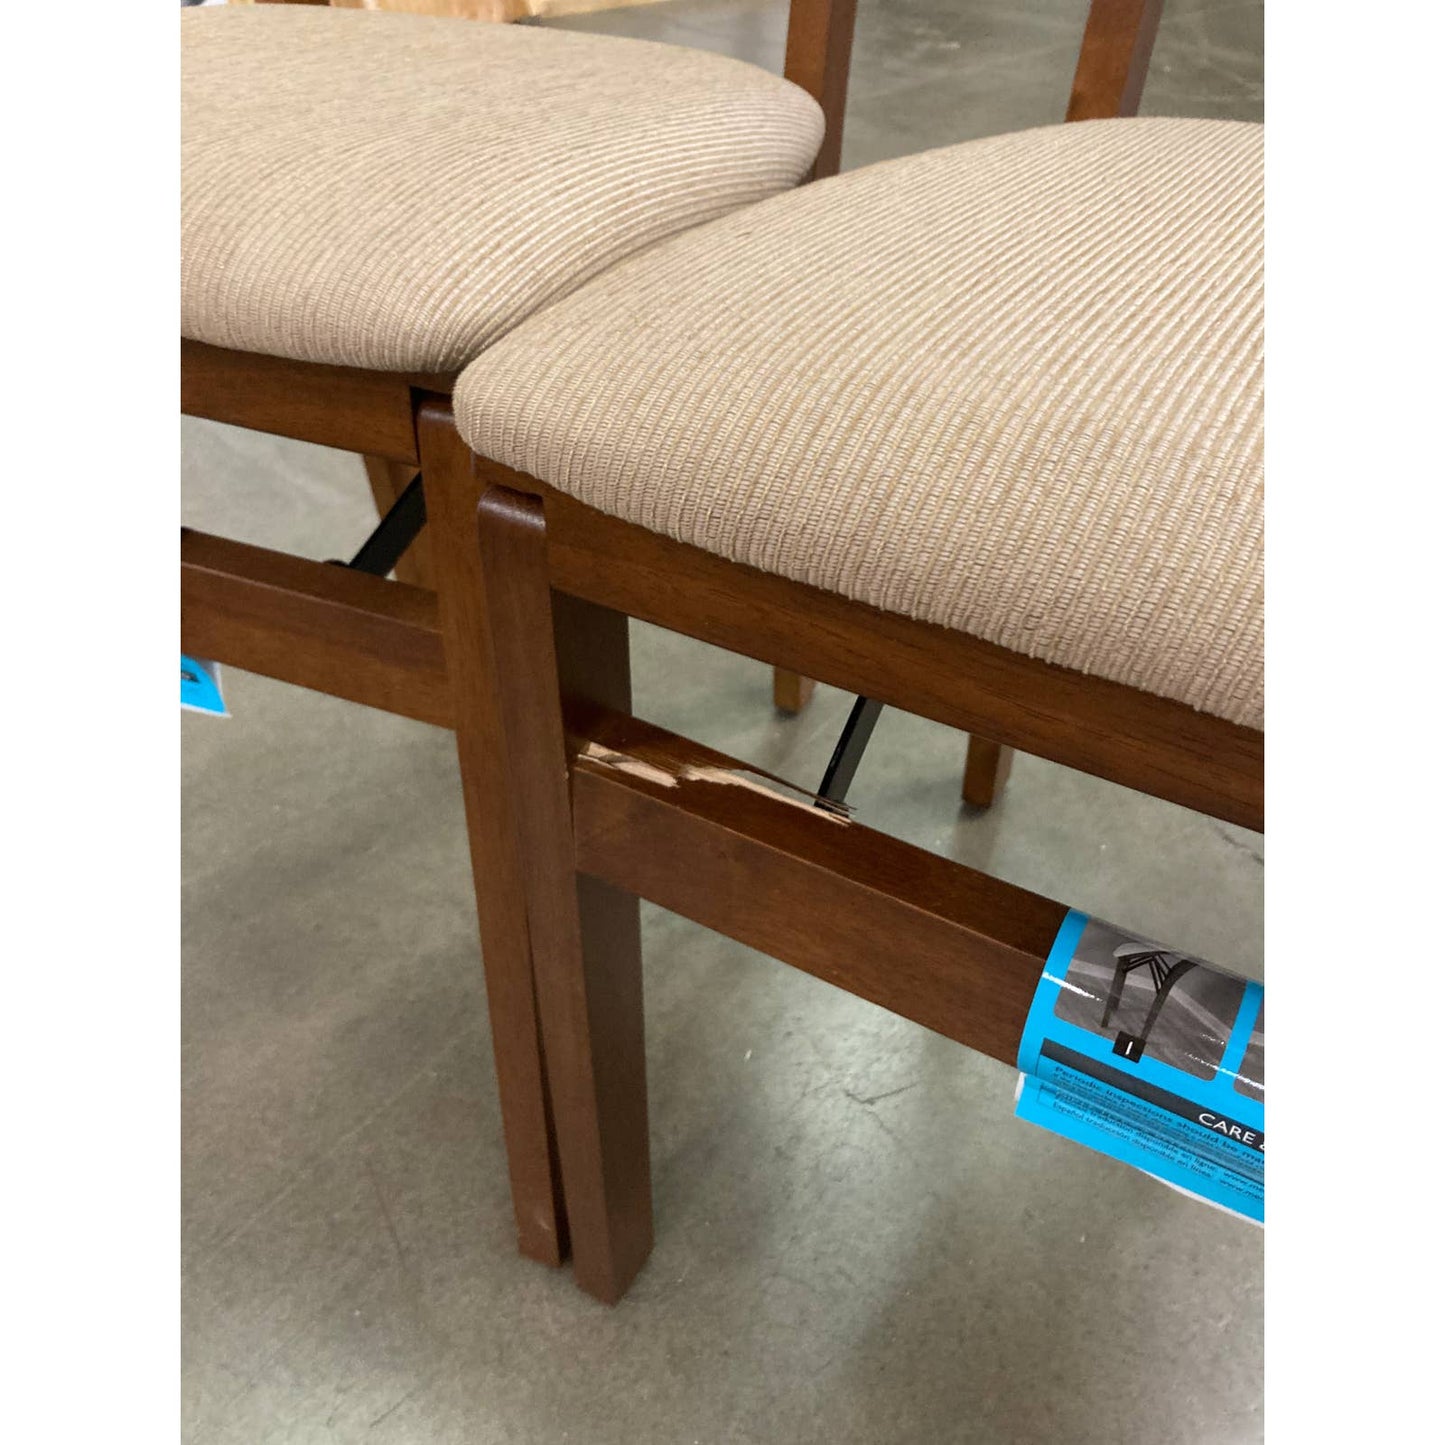 Costco - Stakmore Wood Upholstered Folding Chair, Fruitwood, 2-pack - Retail $99